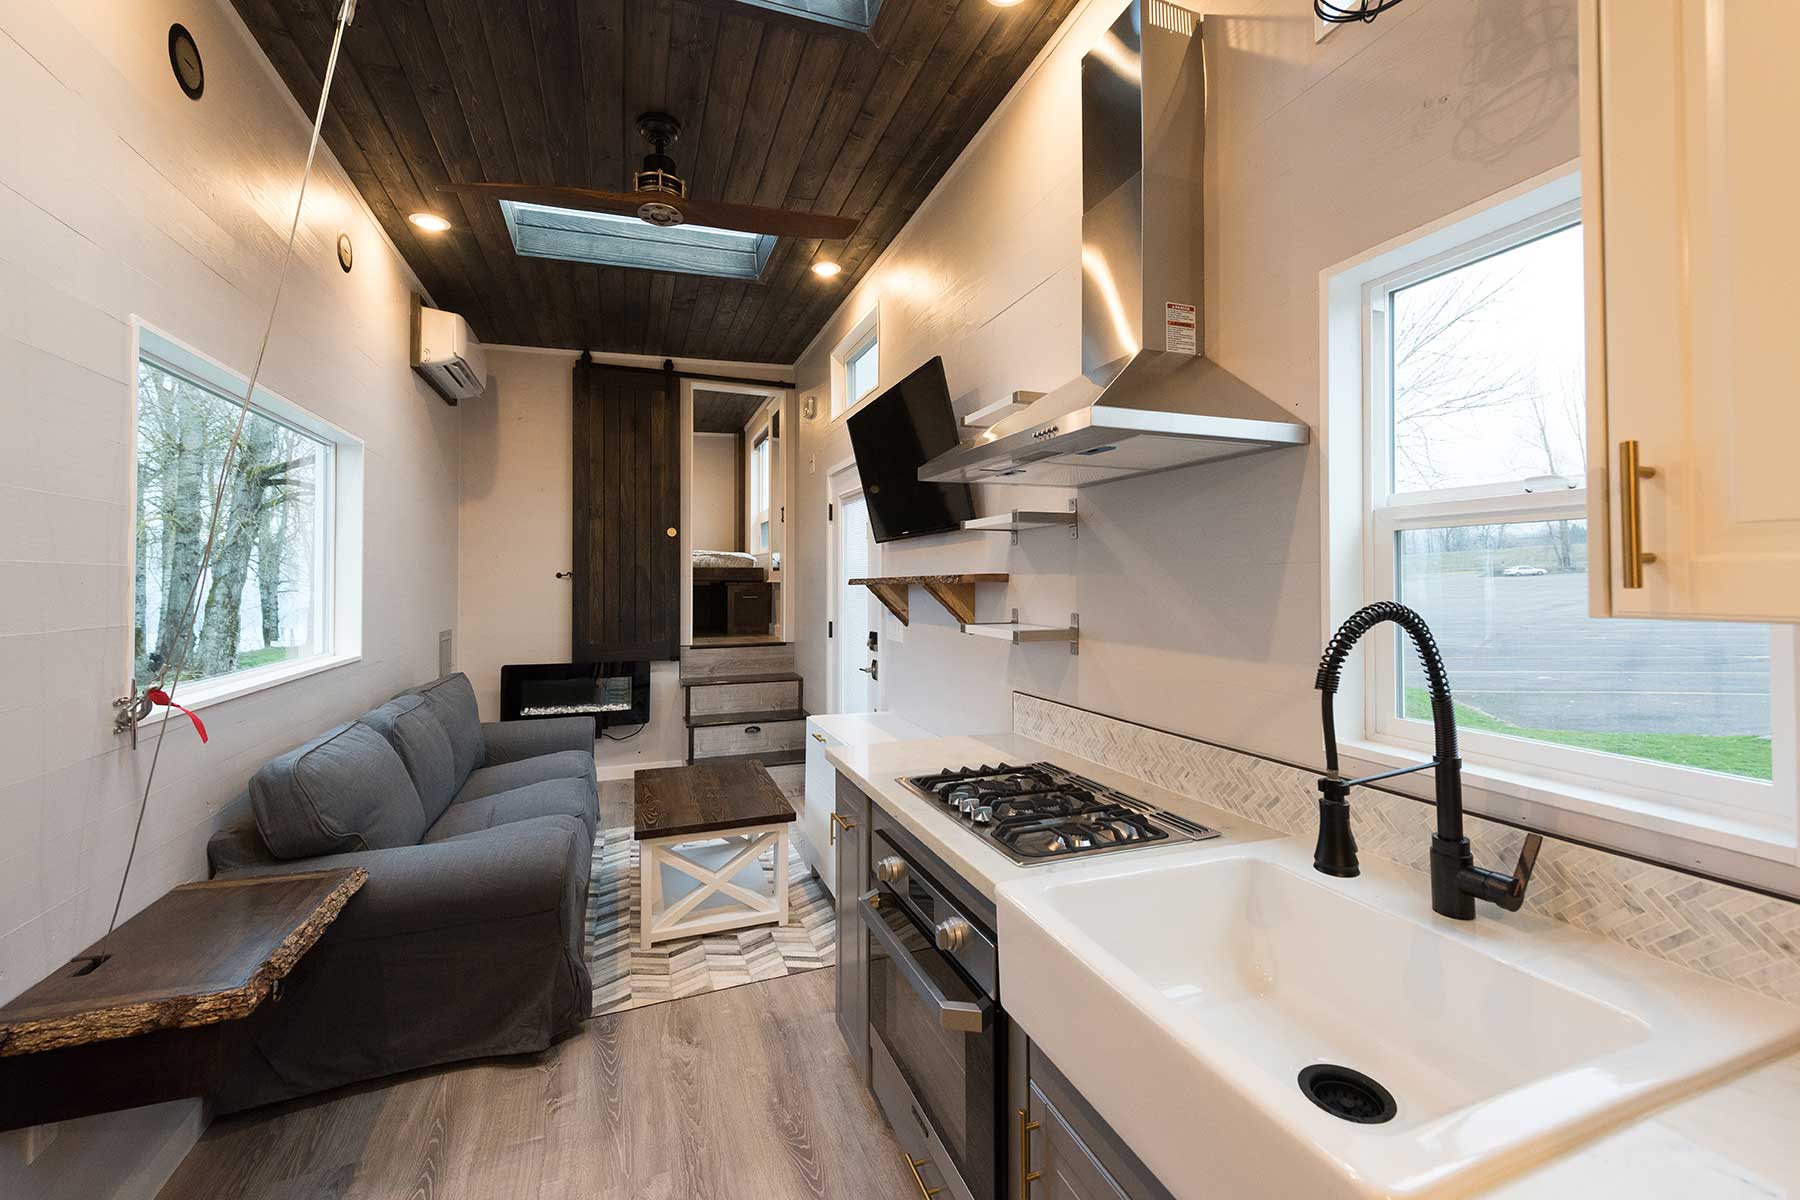 The Kingston custom tiny house's interior showing TV room and kitchen